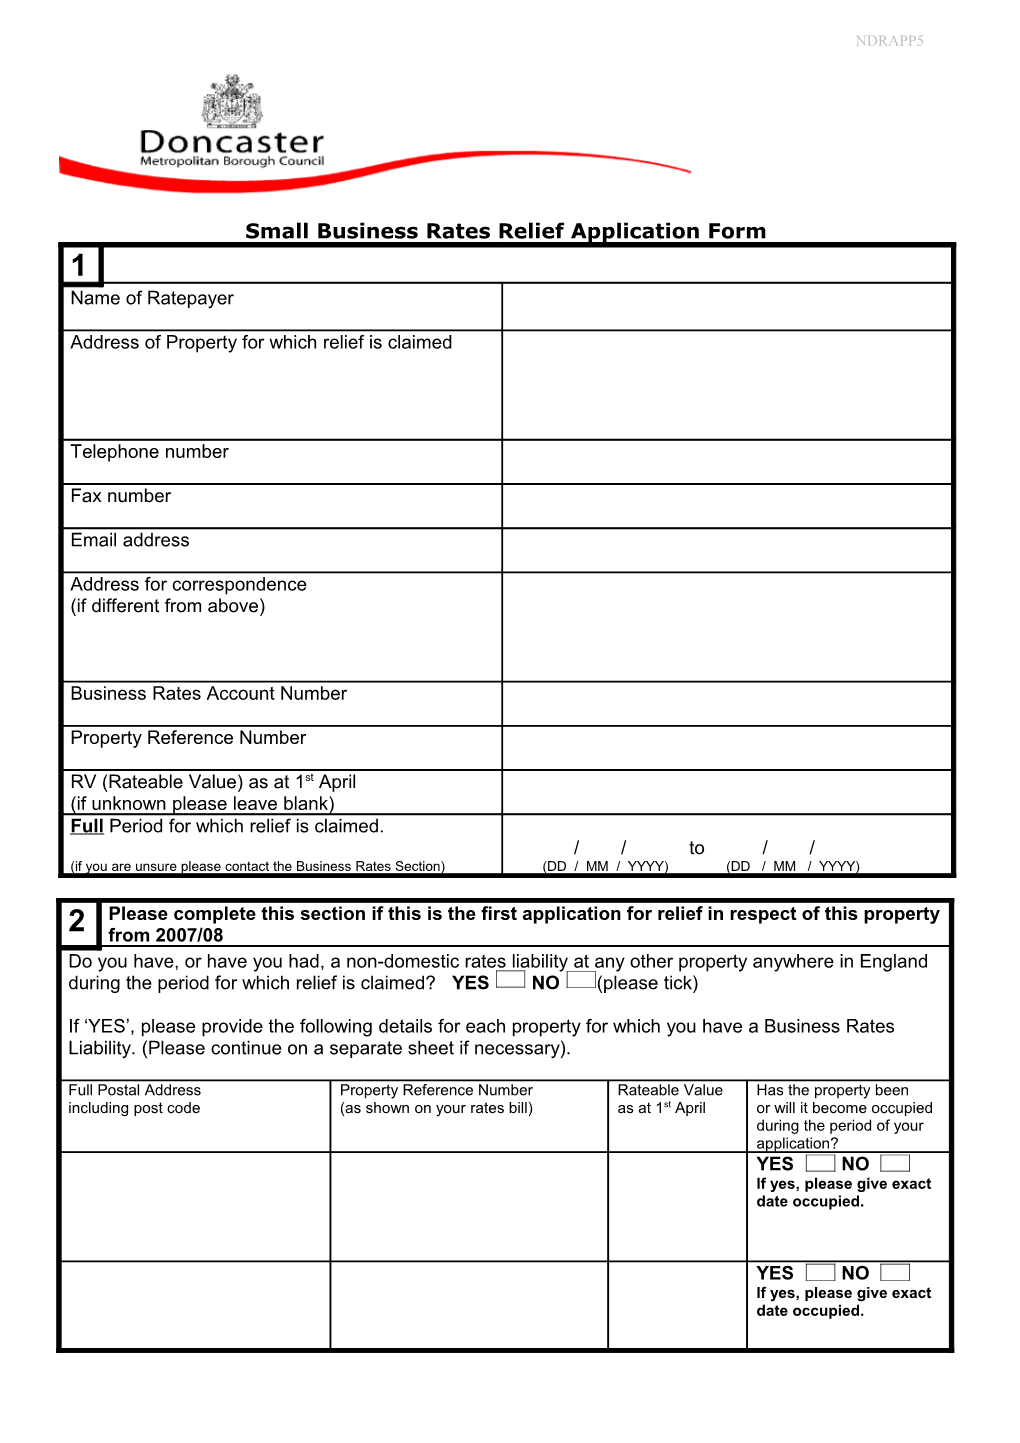 Small Business Rates Relief Application Form